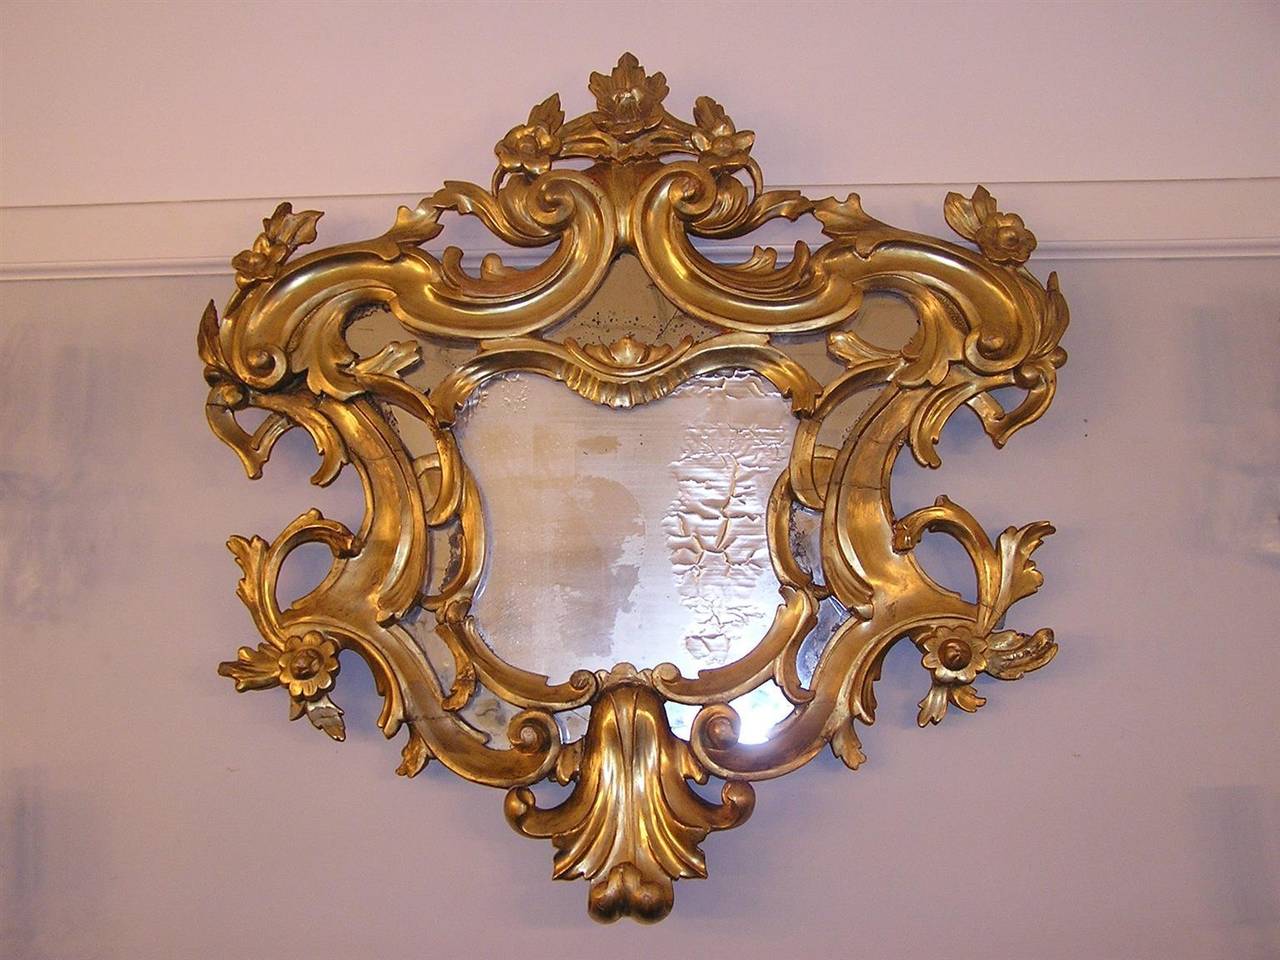 English carved wood gilt decorative floral wall mirror with original glass and wood back. Late 18th century.